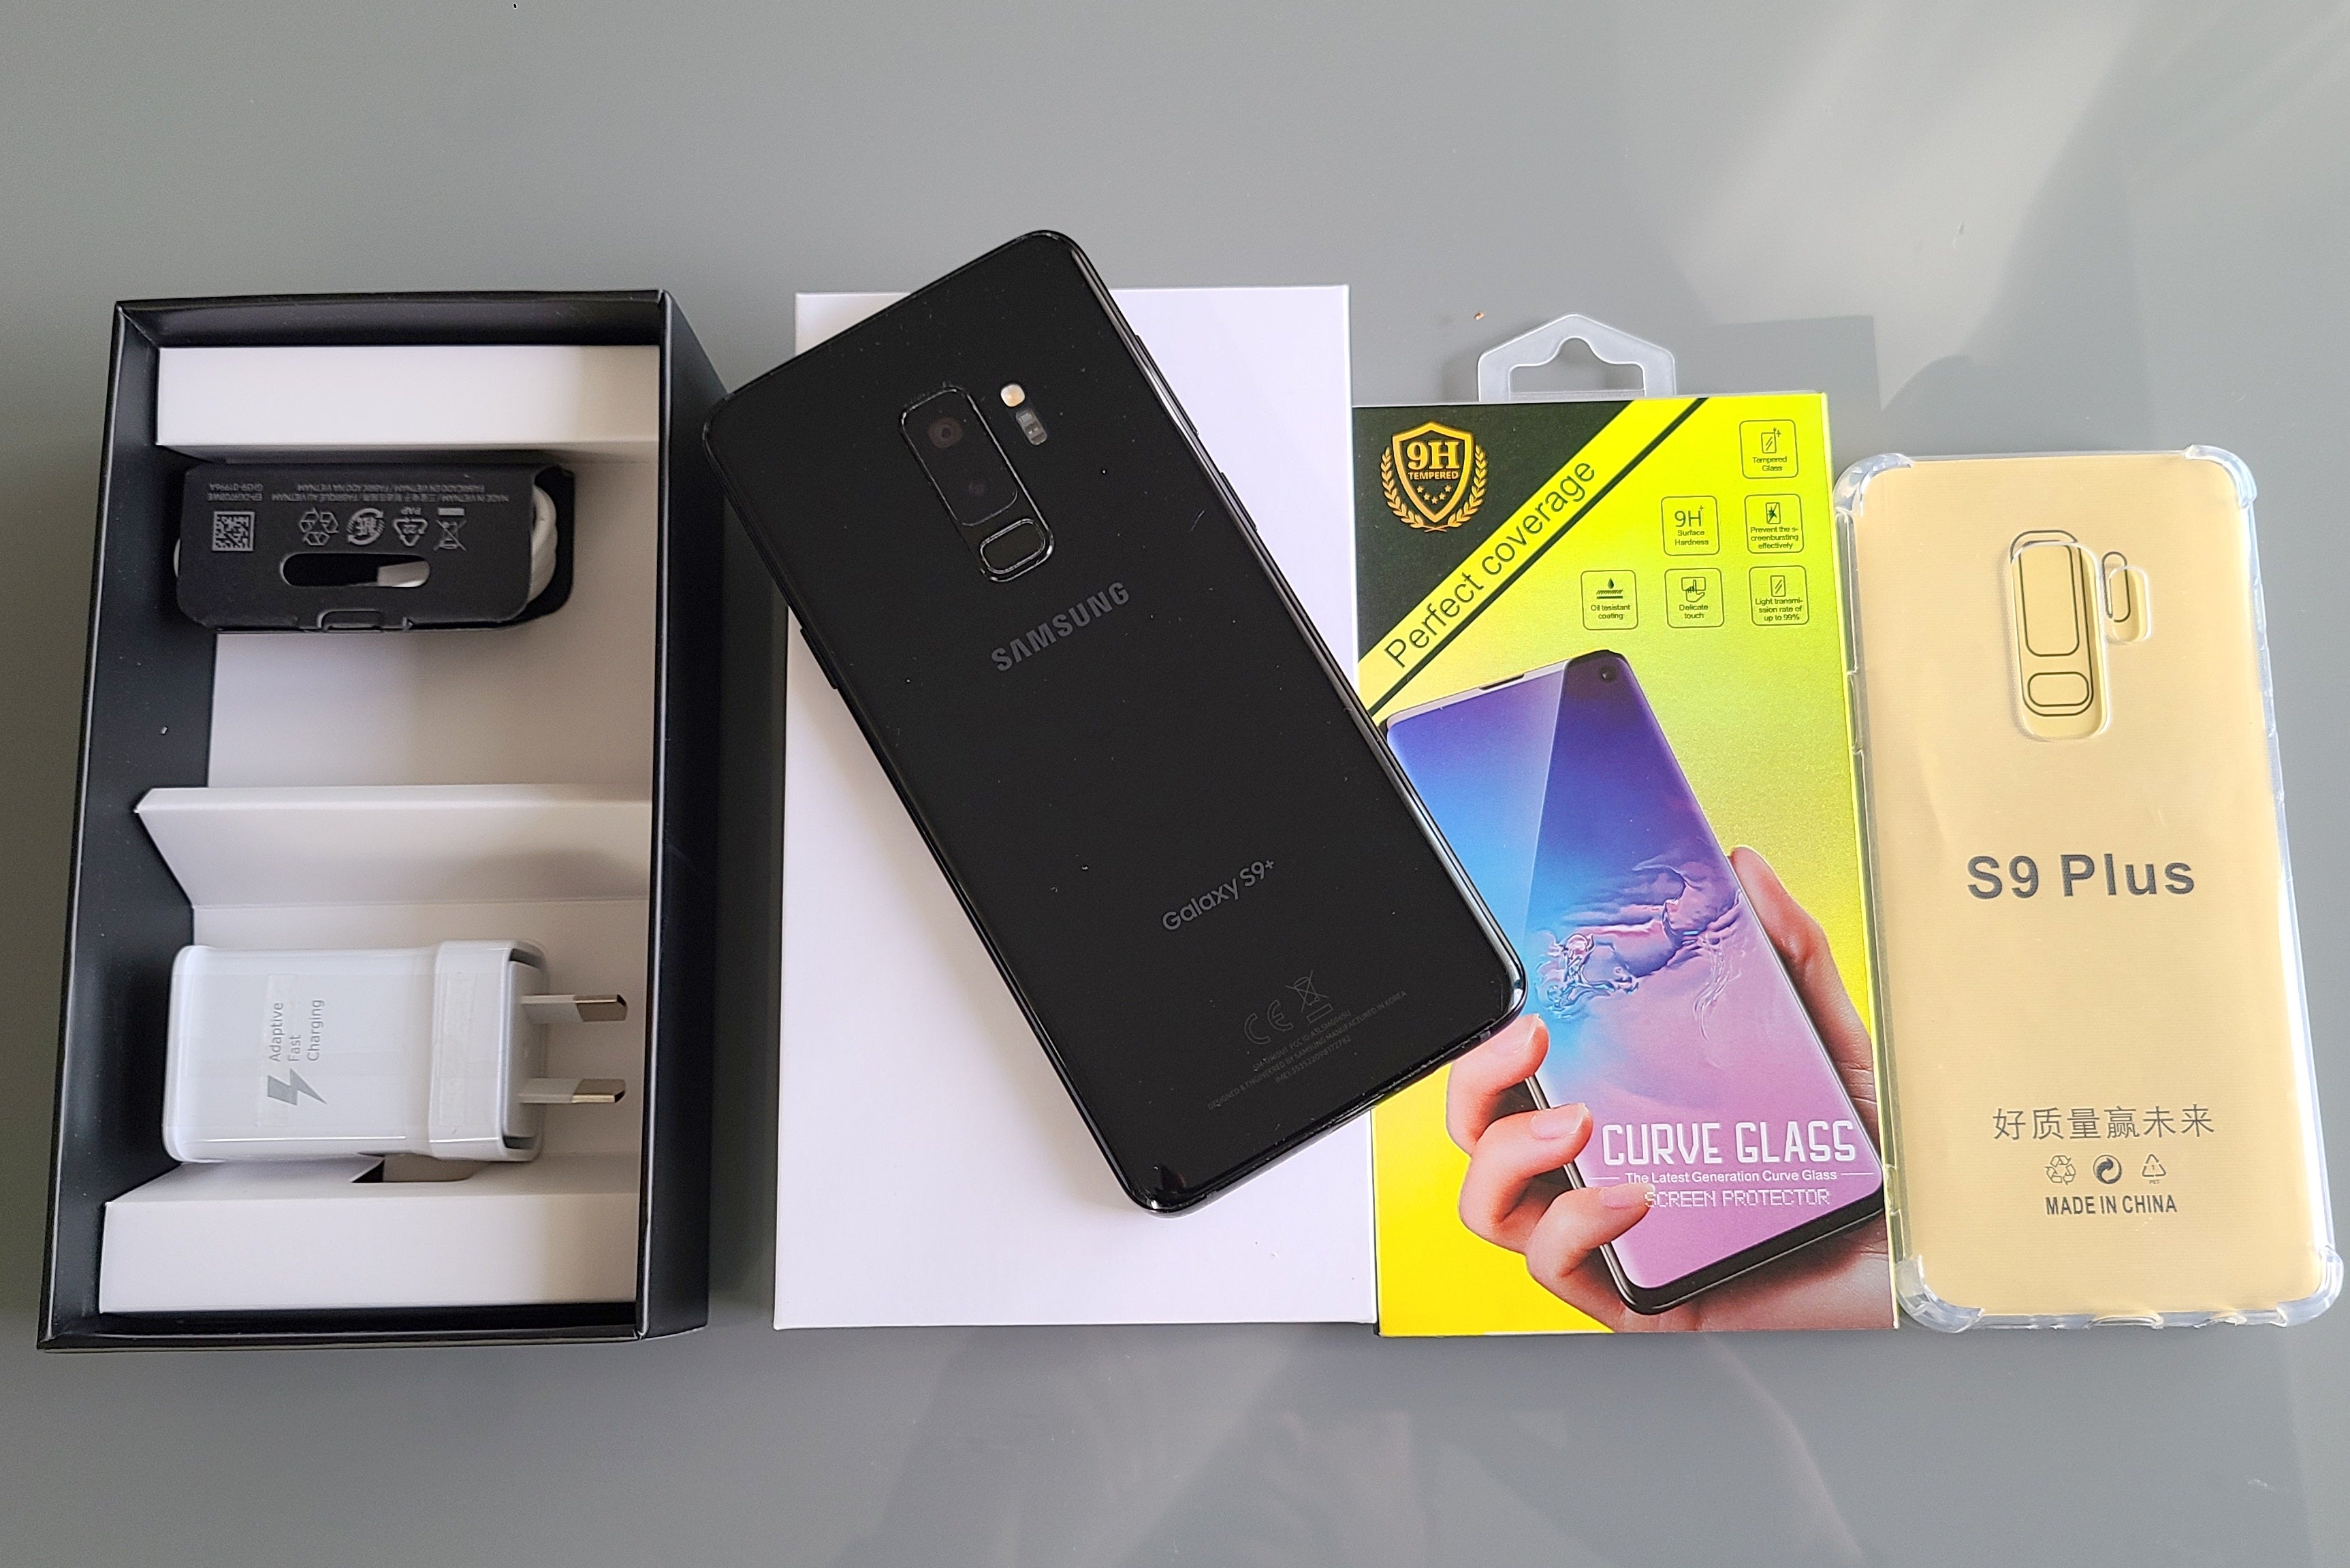 Samsung Galaxy S9 Plus 64GB Black (Like New) With Case, Screen Protector & Shipping